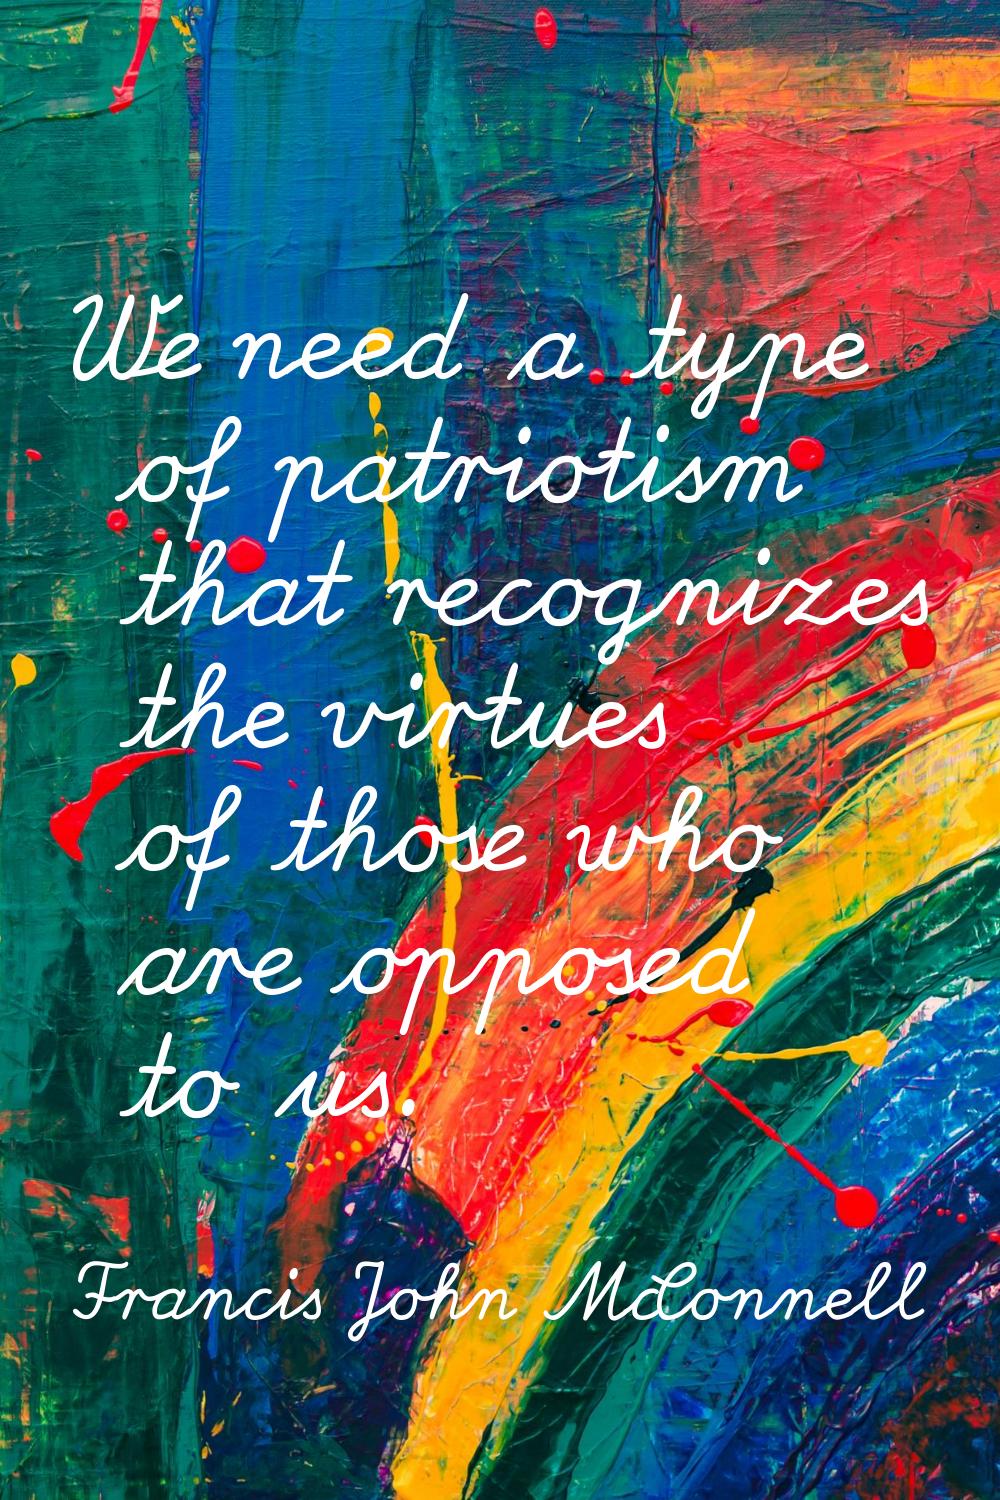 We need a type of patriotism that recognizes the virtues of those who are opposed to us.